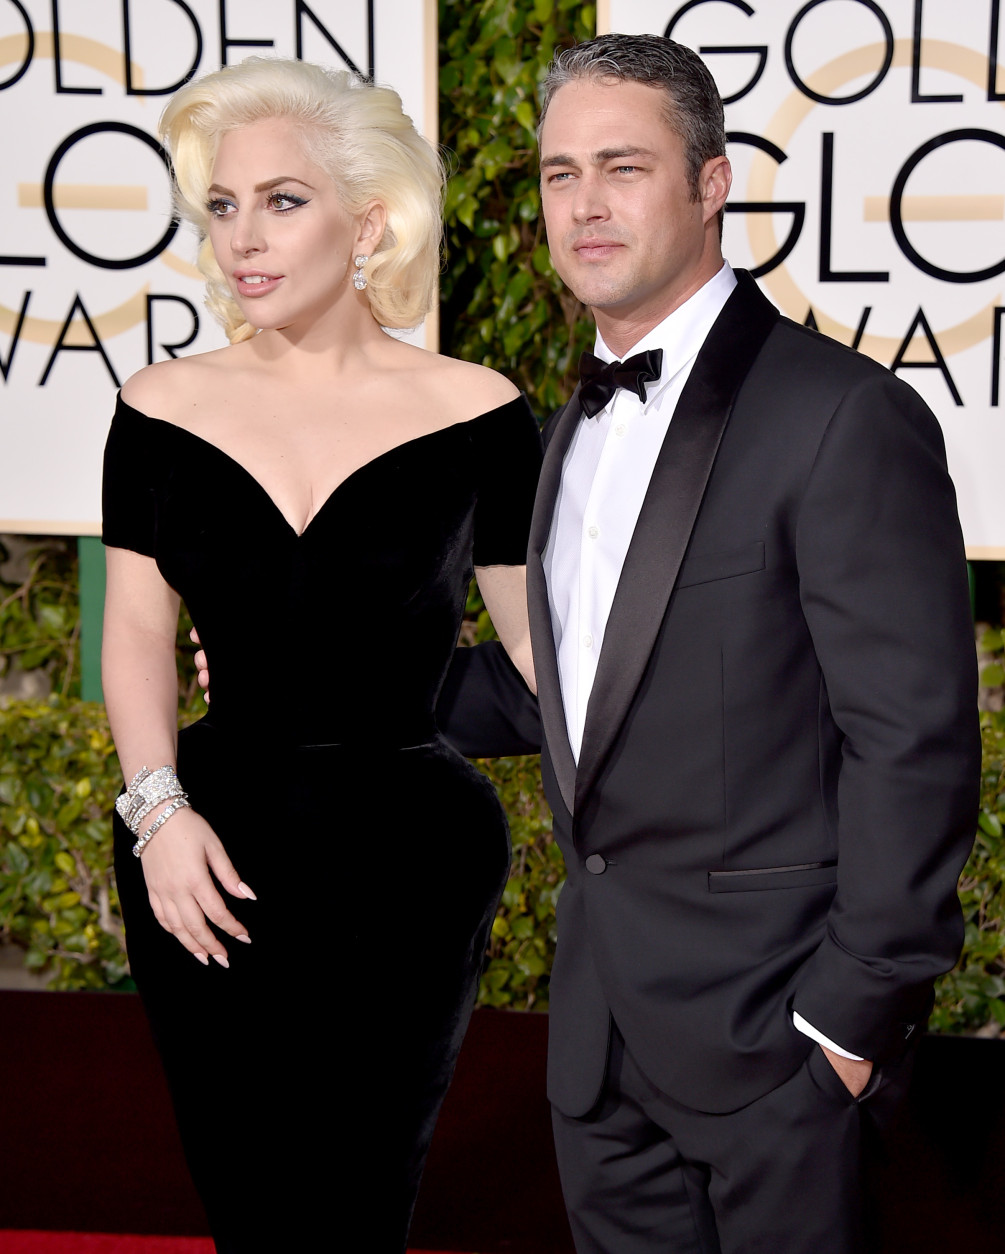 Lady Gaga, left, and Taylor Kinney arrive at the 73rd annual Golden Globe Awards on Sunday, Jan. 10, 2016, at the Beverly Hilton Hotel in Beverly Hills, Calif. (Photo by Jordan Strauss/Invision/AP)